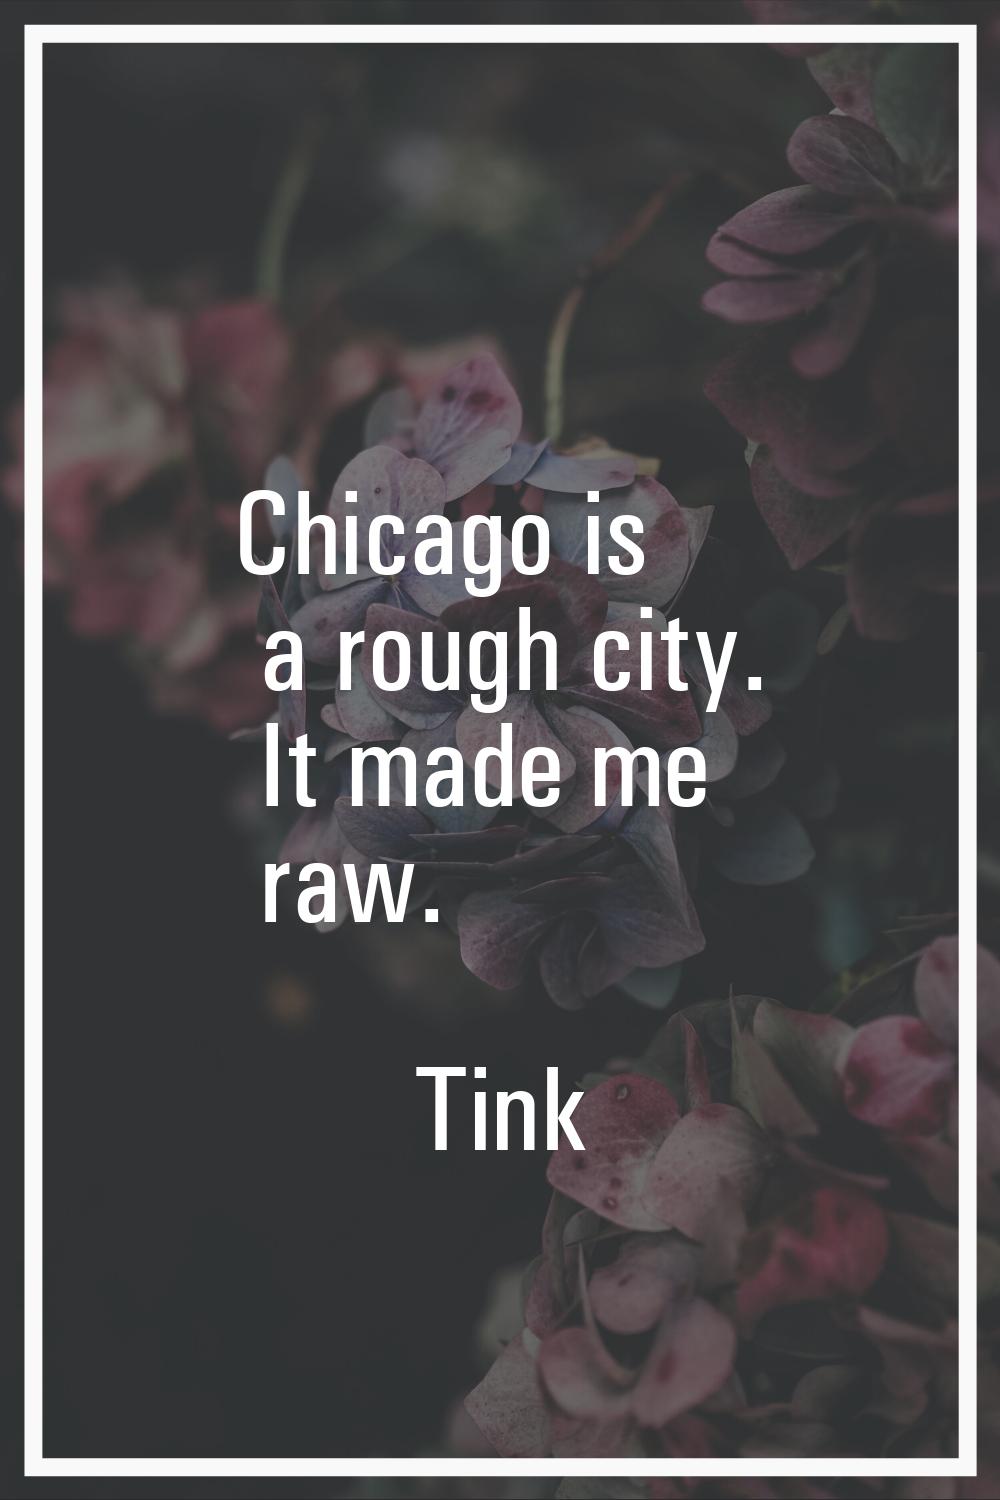 Chicago is a rough city. It made me raw.